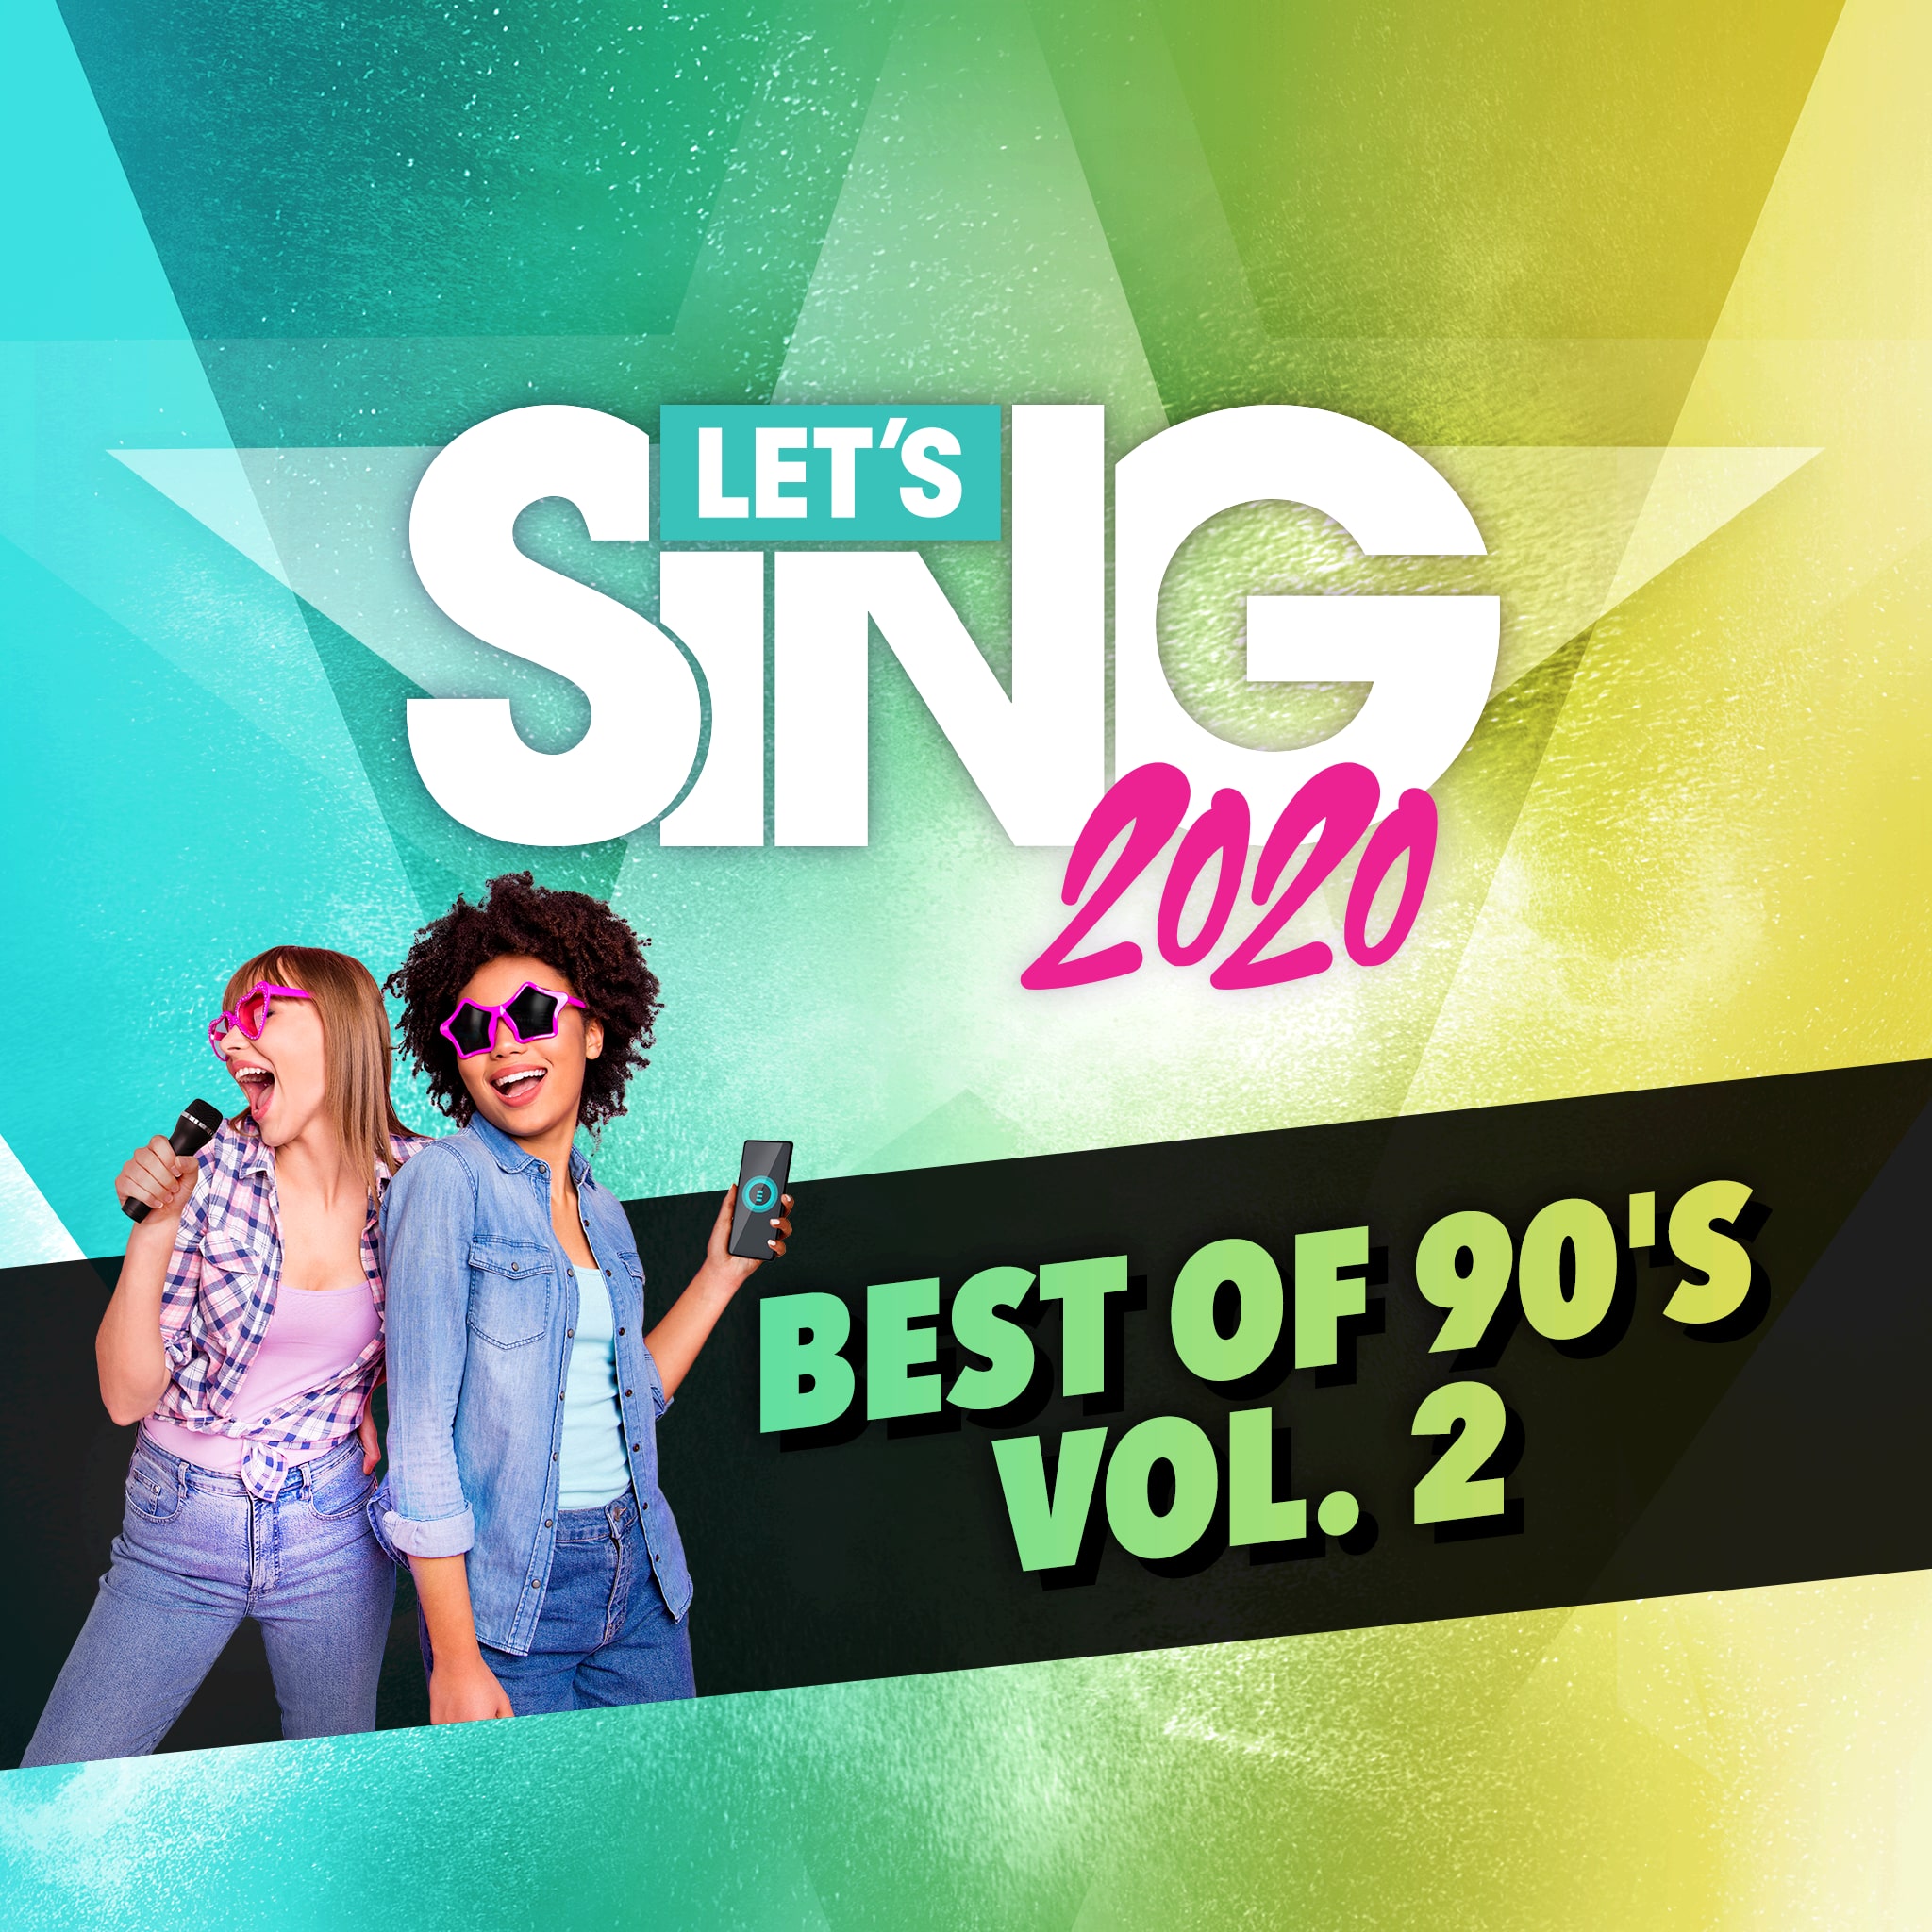 Let's Sing 2020 - Best of 90's Vol. 2 Song Pack